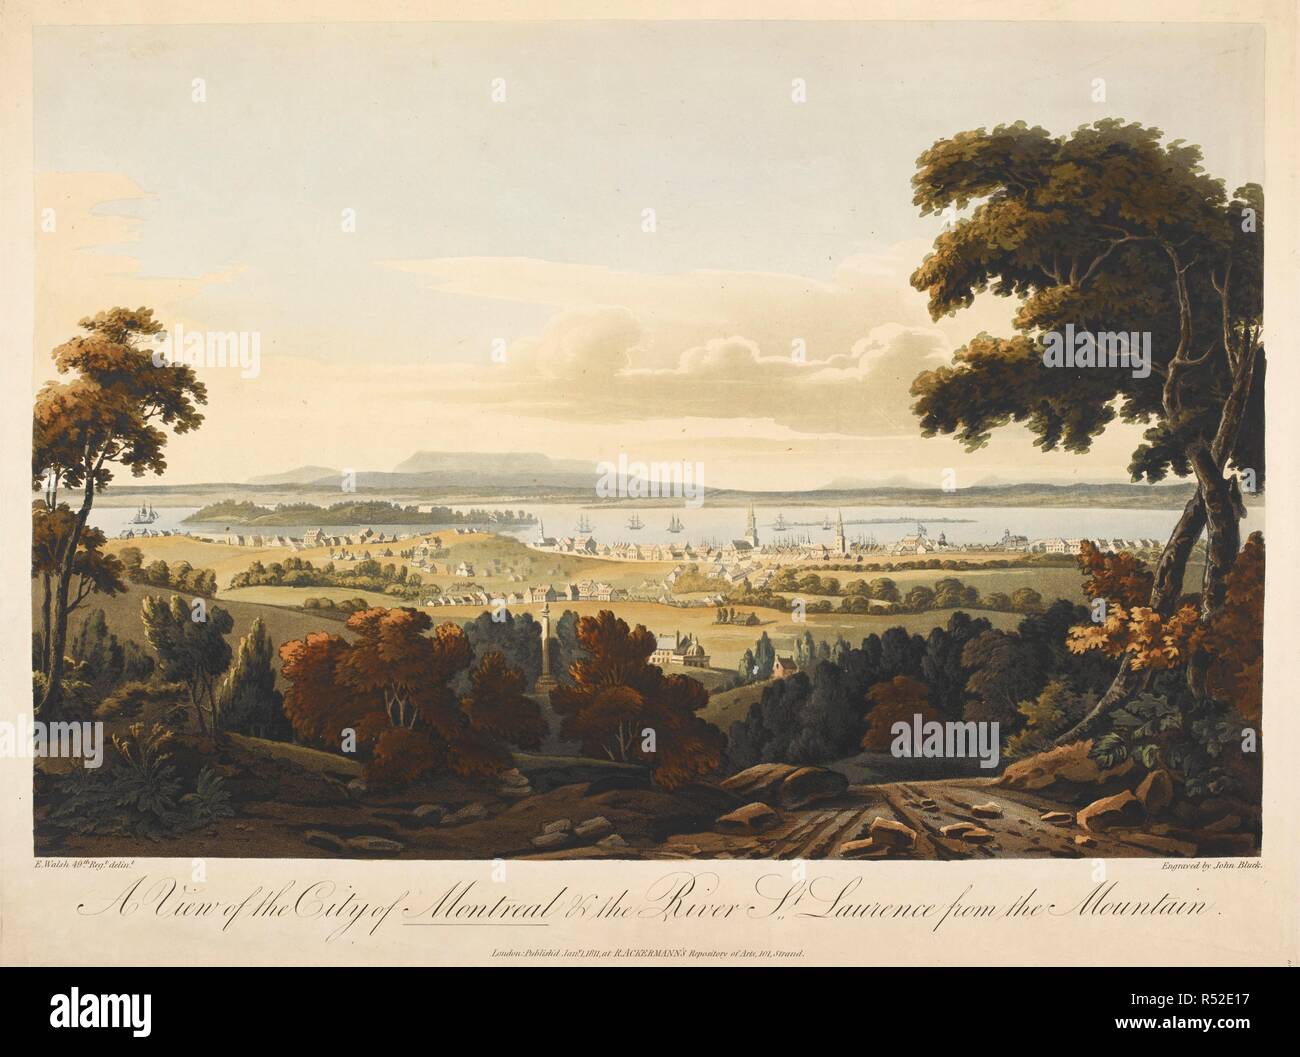 A view looking down from a hill across fields towards Montreal; a column in the middle ground; the St. Lawrence River and boats in the distance. A View of the City of Montreal & the River St. Lawrence from the Mountain. London : Publish'd Jany 1 1811, at R. ACKERMANN'S Repository of Arts, 101, Strand. Source: Maps K.Top.119.42.d. Language: English. Author: Bluck. Stock Photo